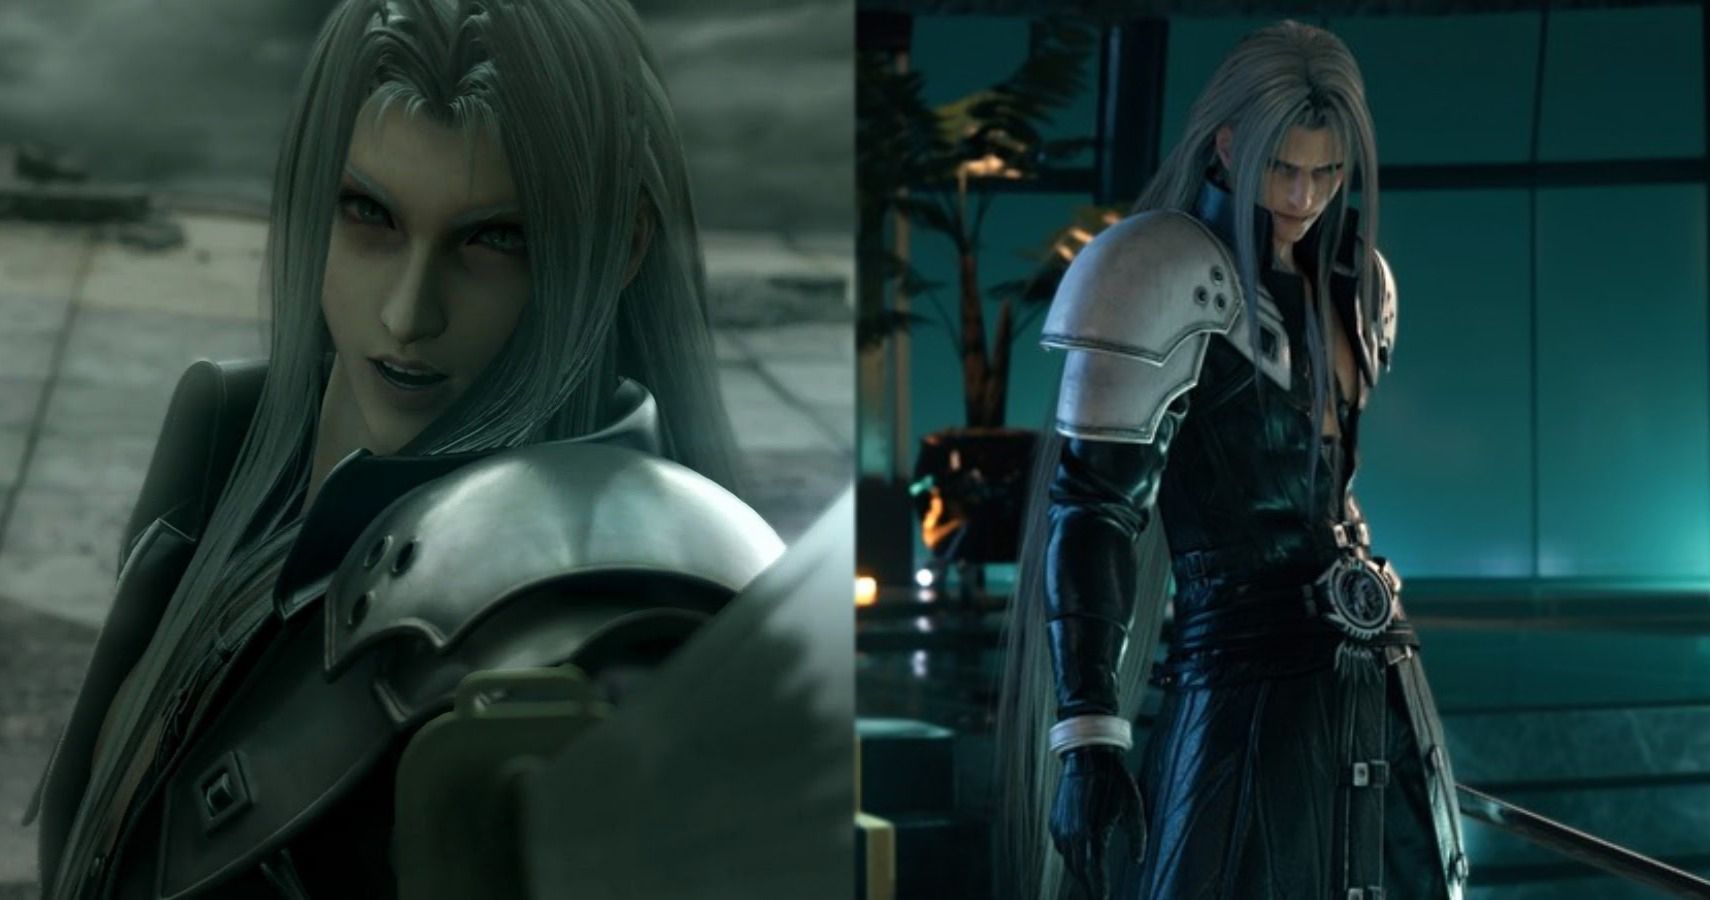 Final Fantasy VII Remake Theory – Did Sephiroth Travel Back In Time?